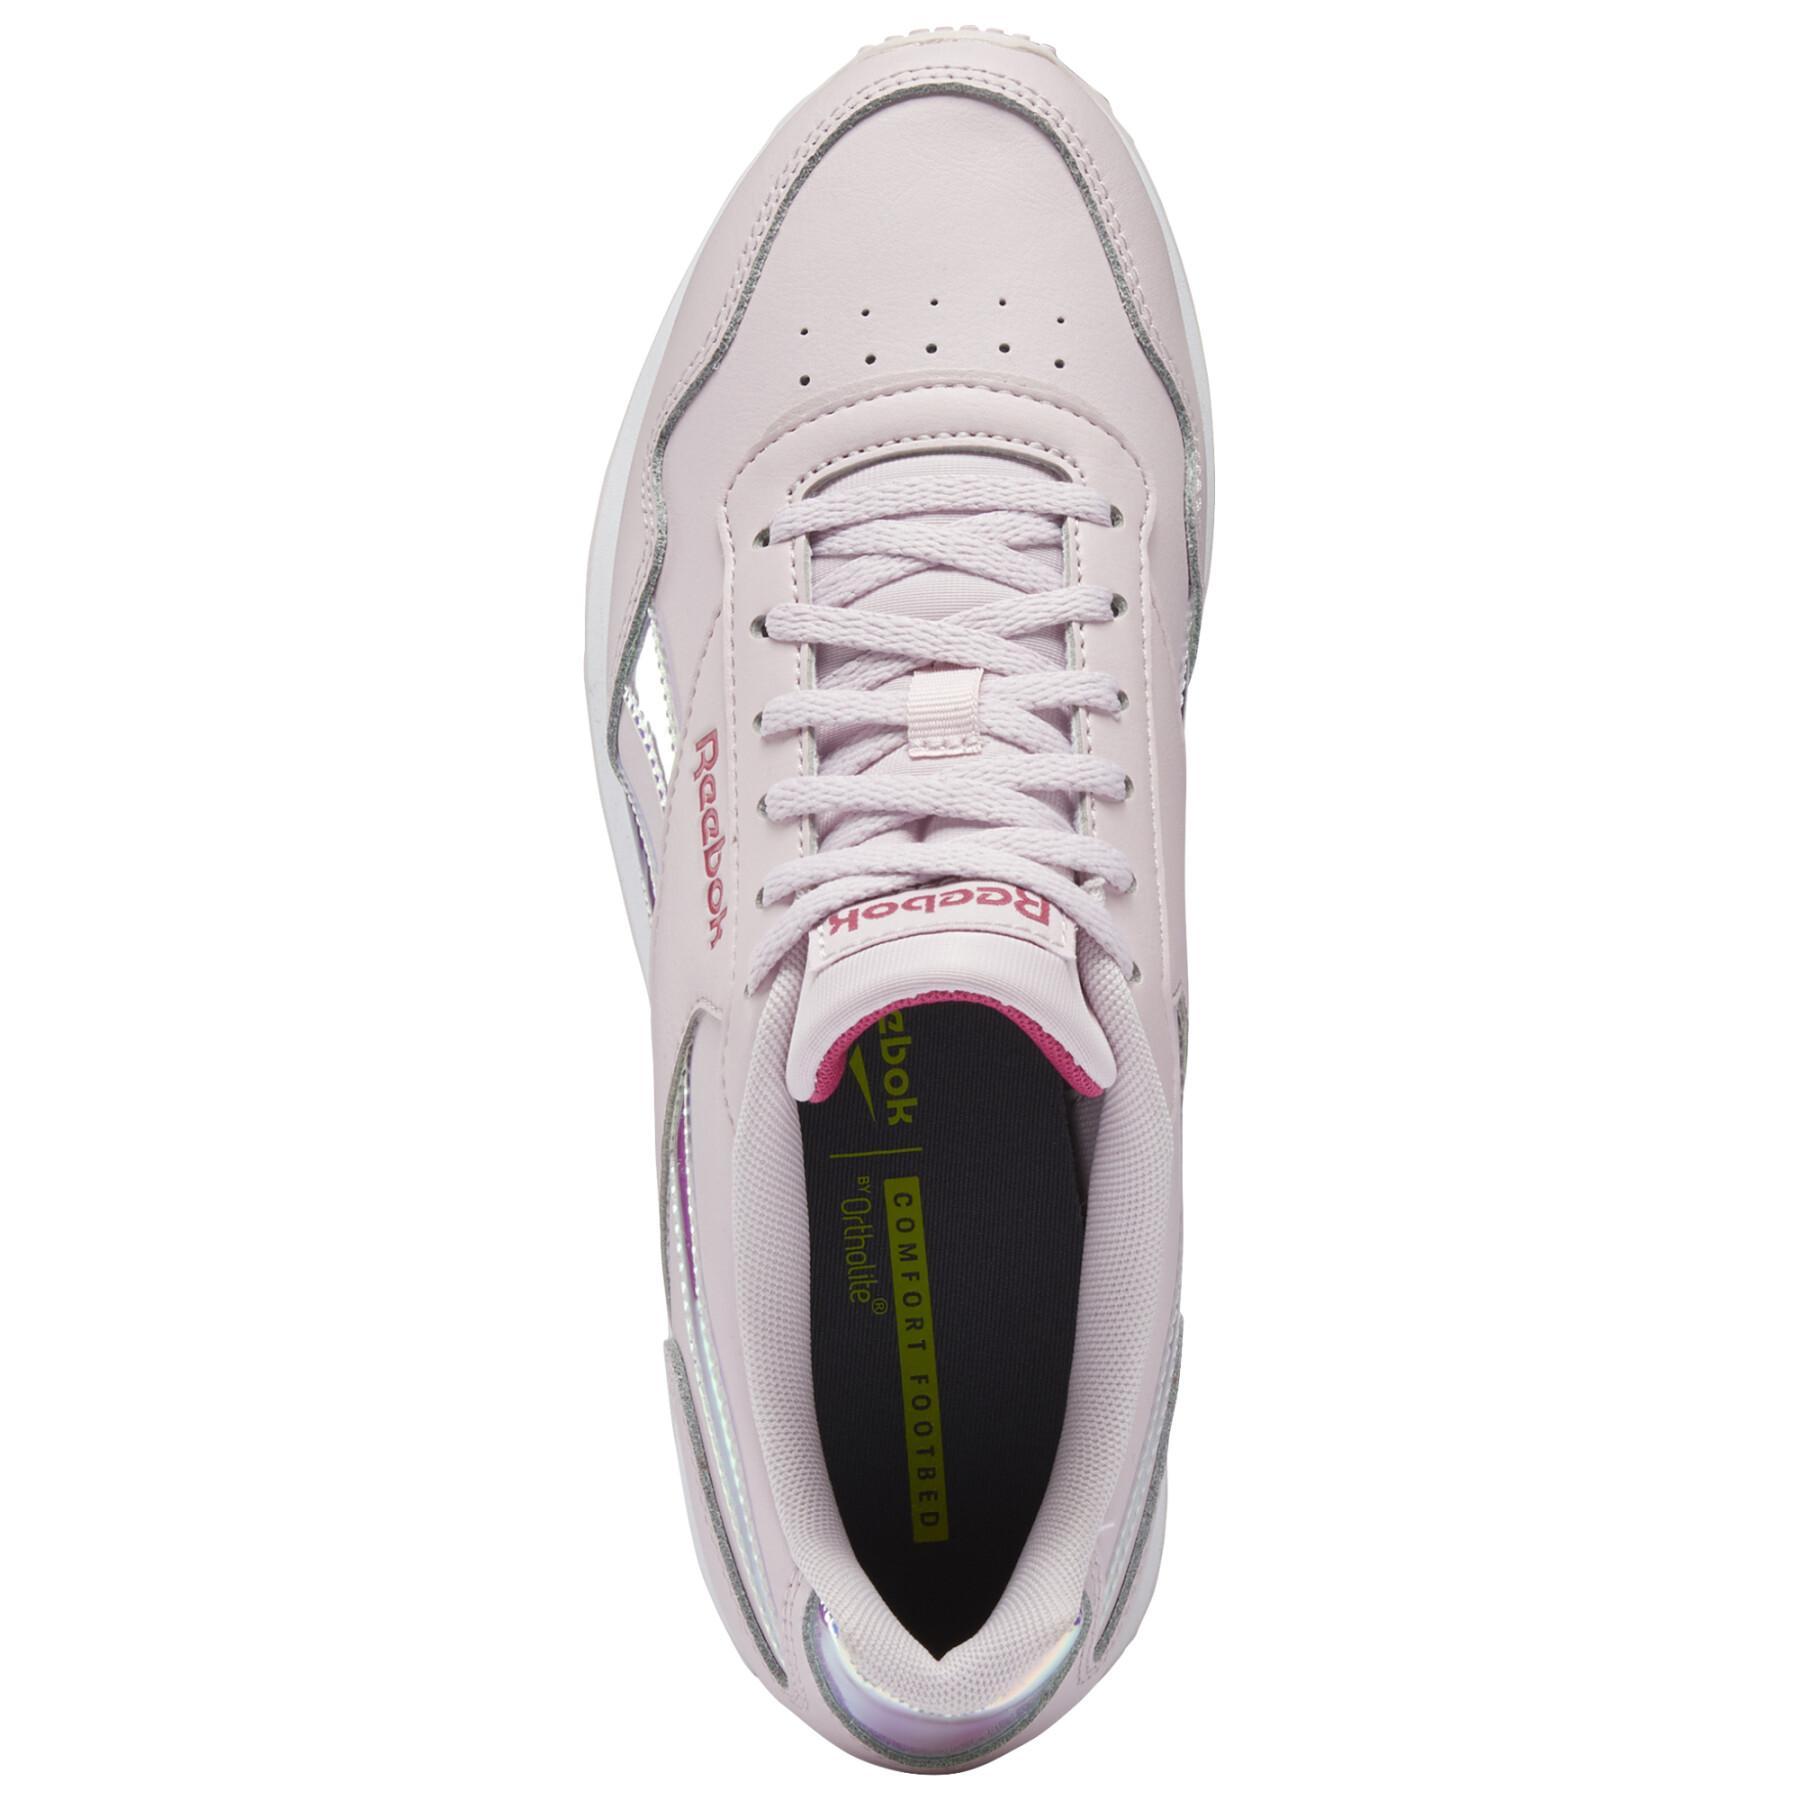 Chaussures femme Reebok Royal Glide Ripple Double